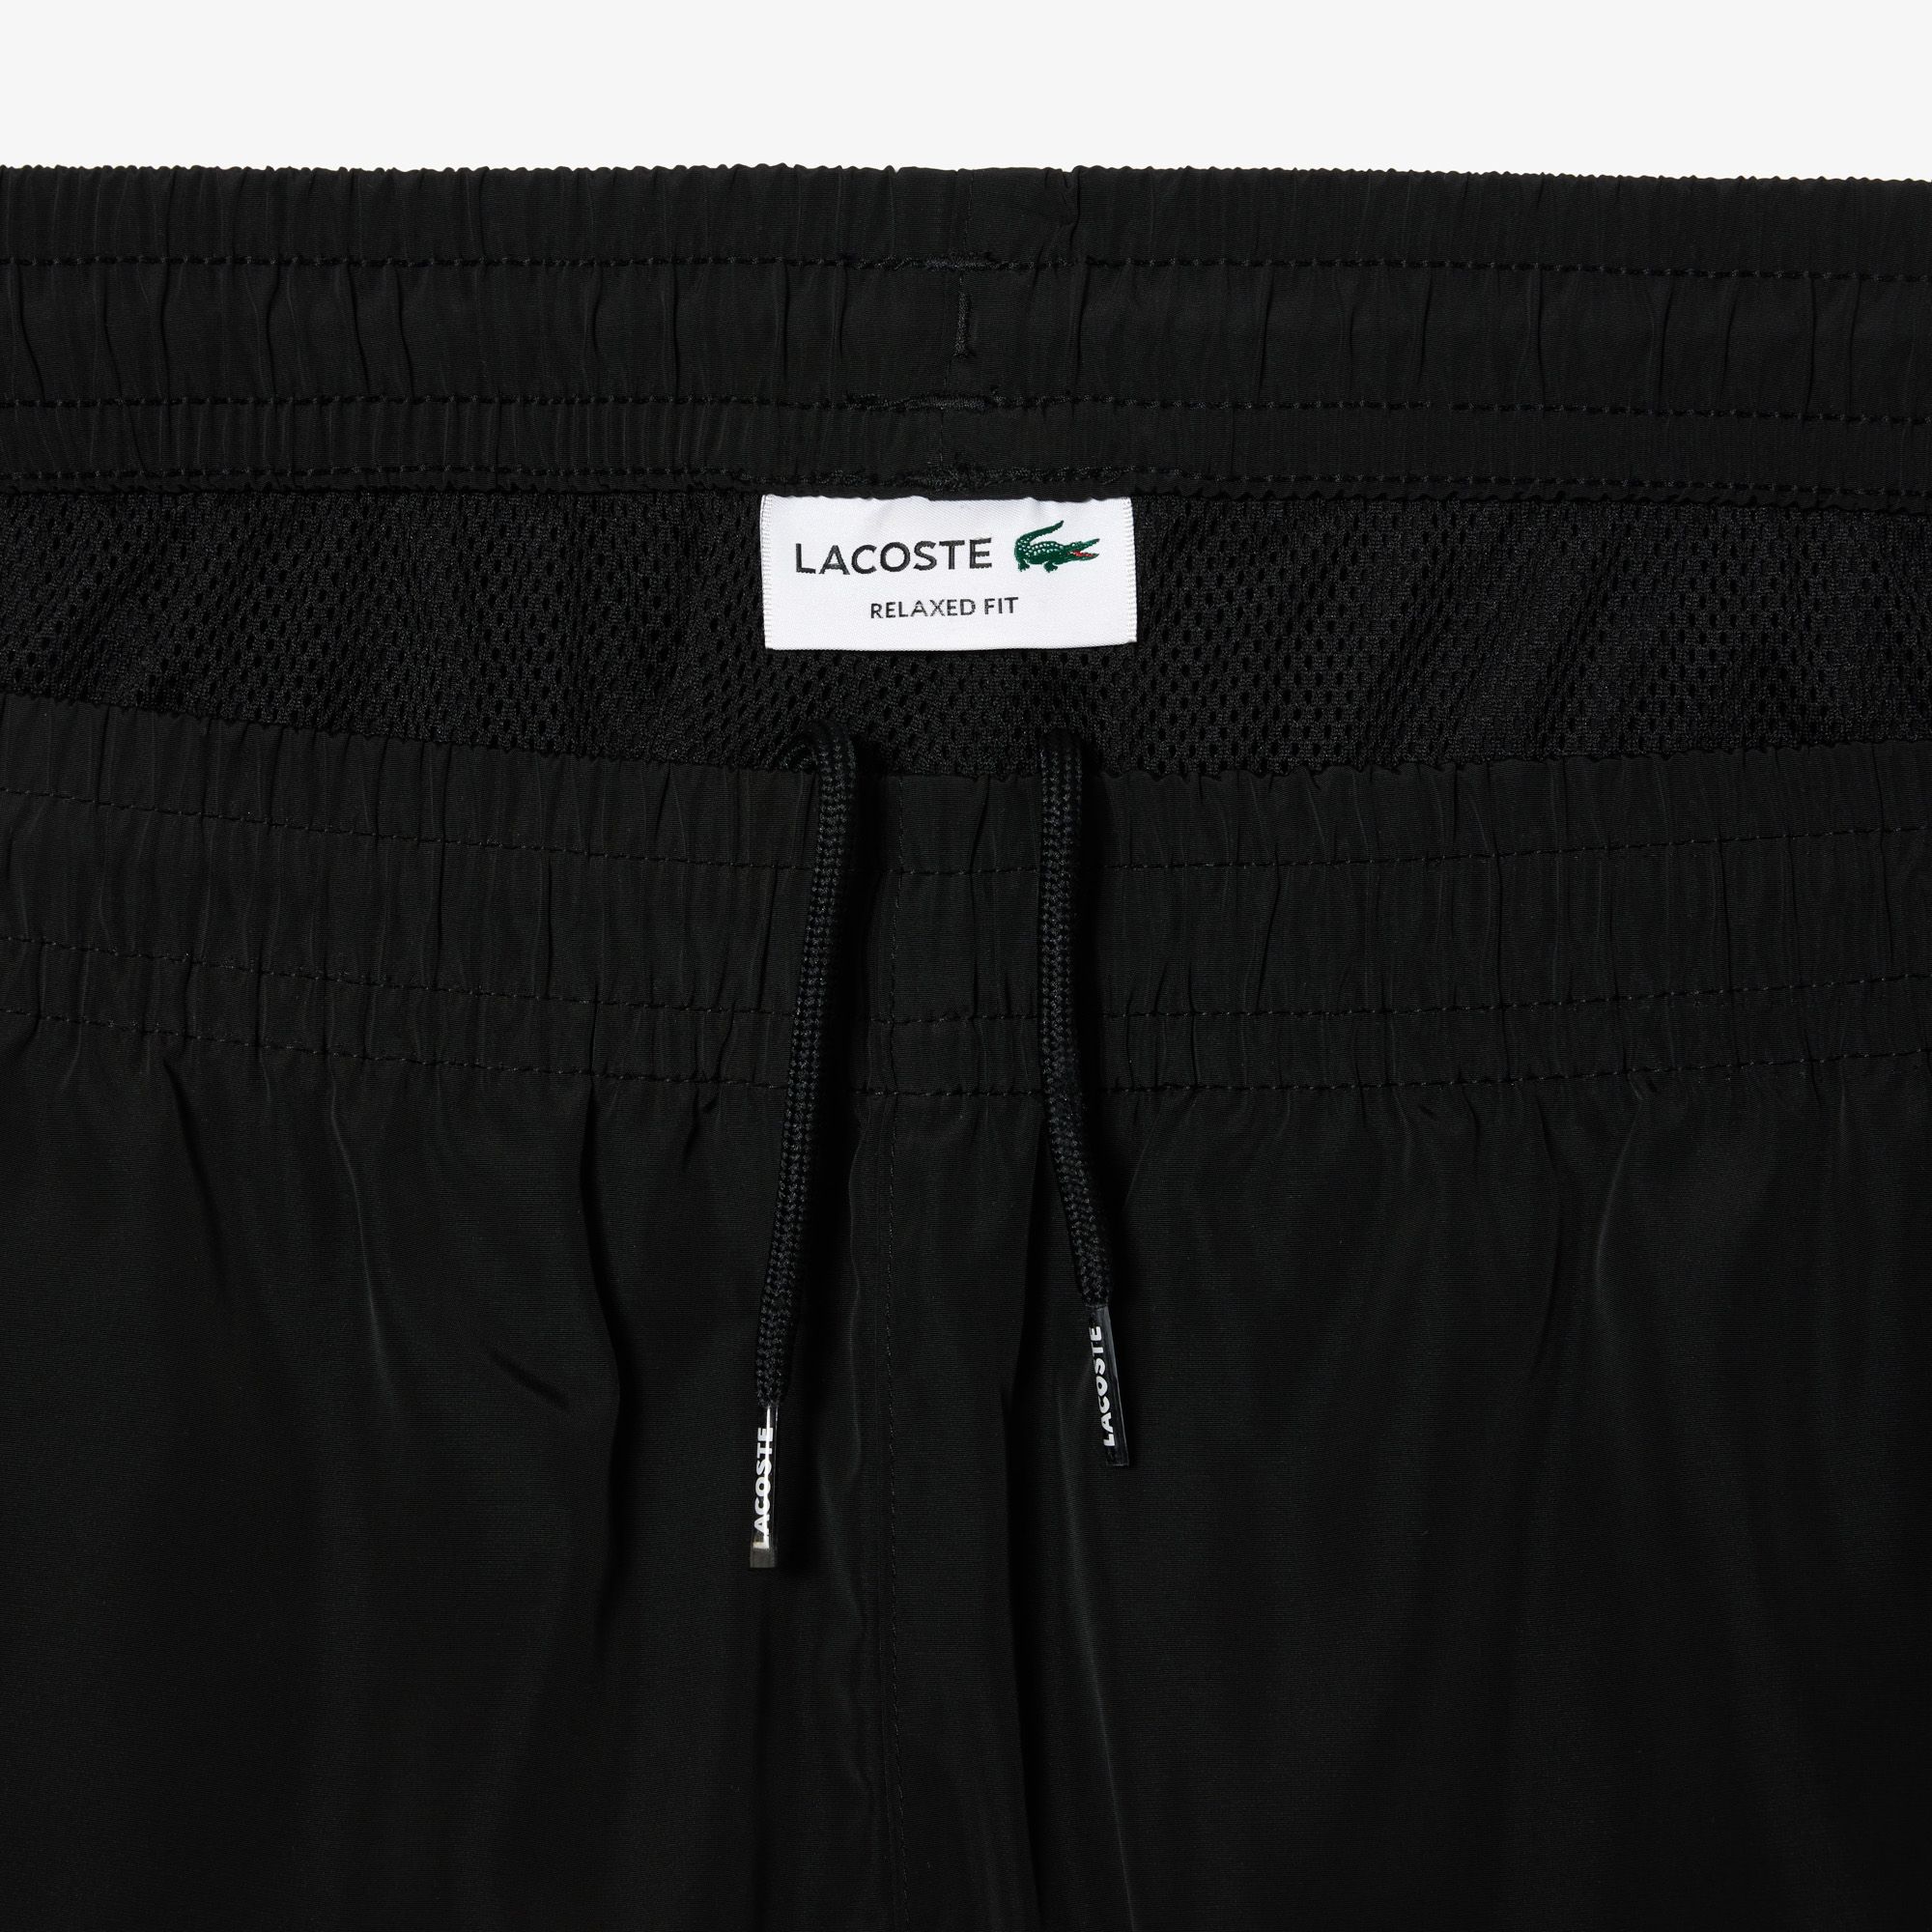  Lacoste Relaxed Fit Recycled Fiber Embroidered Shorts - Black 